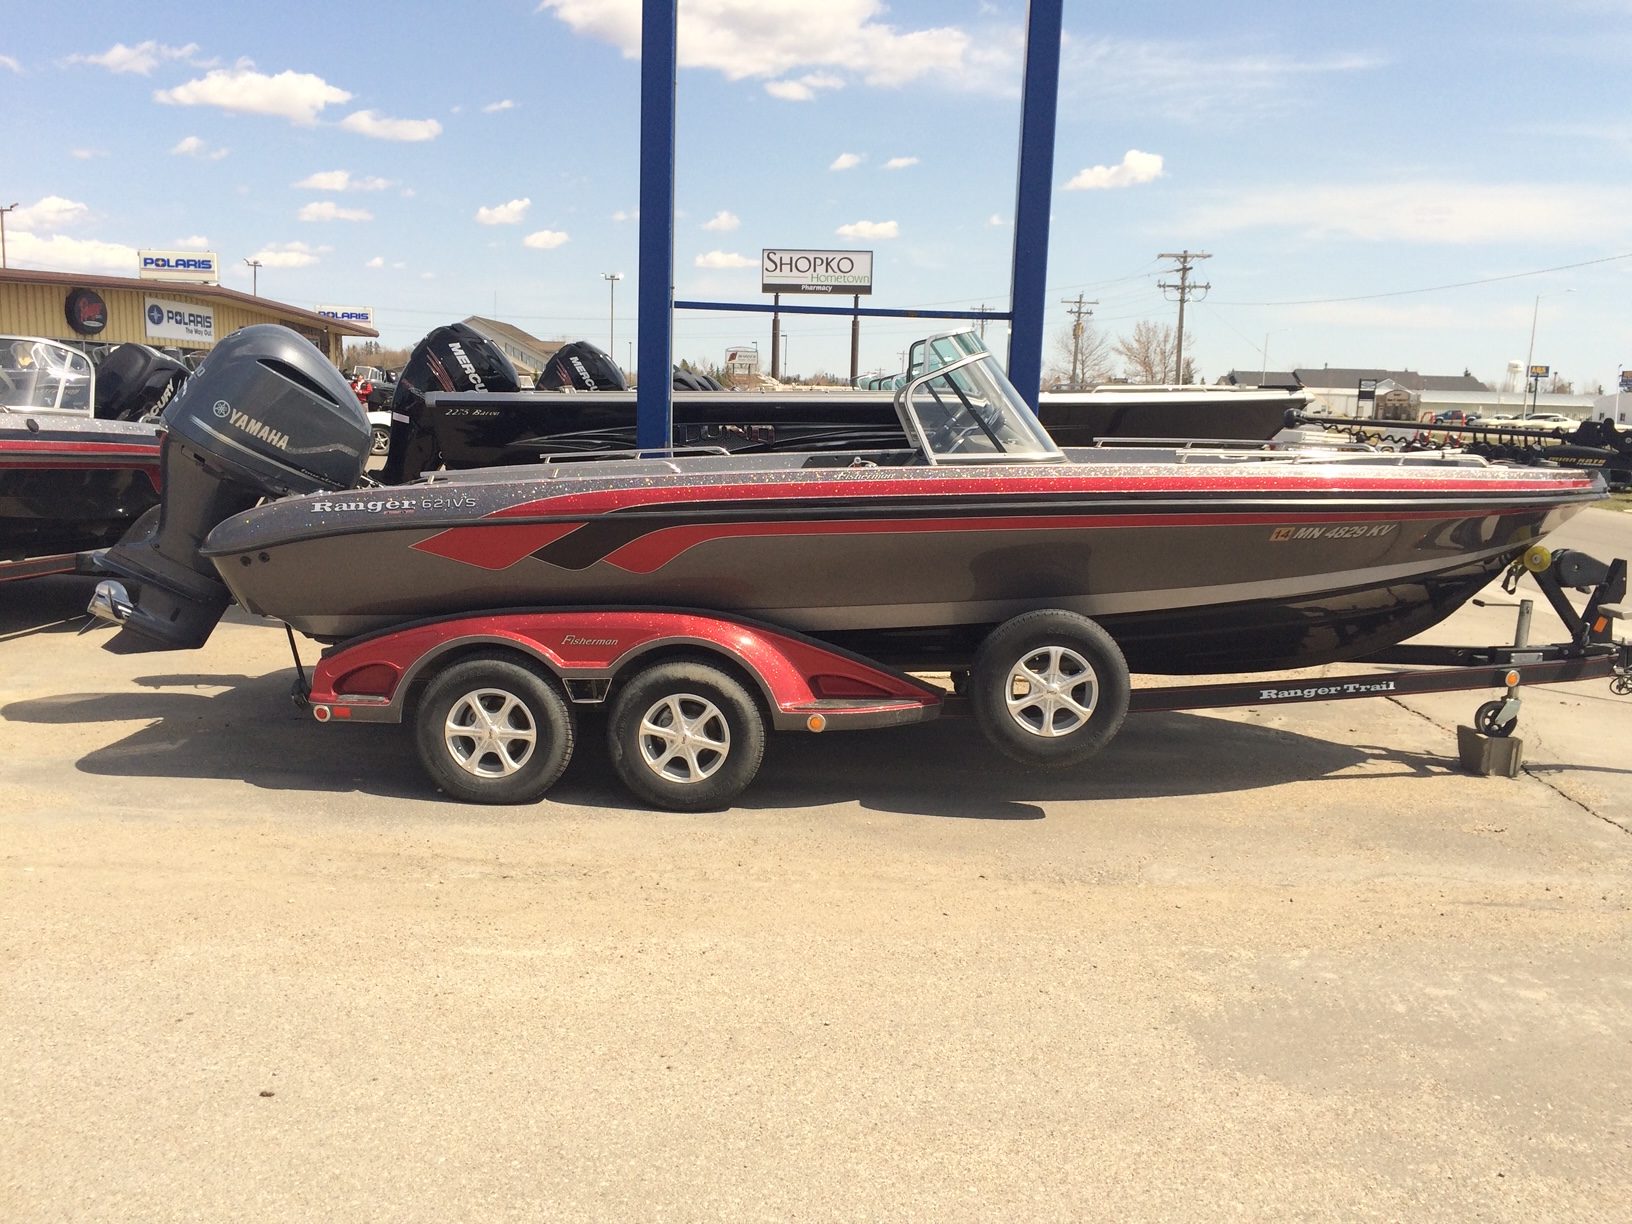 Walleye boat - General Discussion Forum - General Discussion Forum